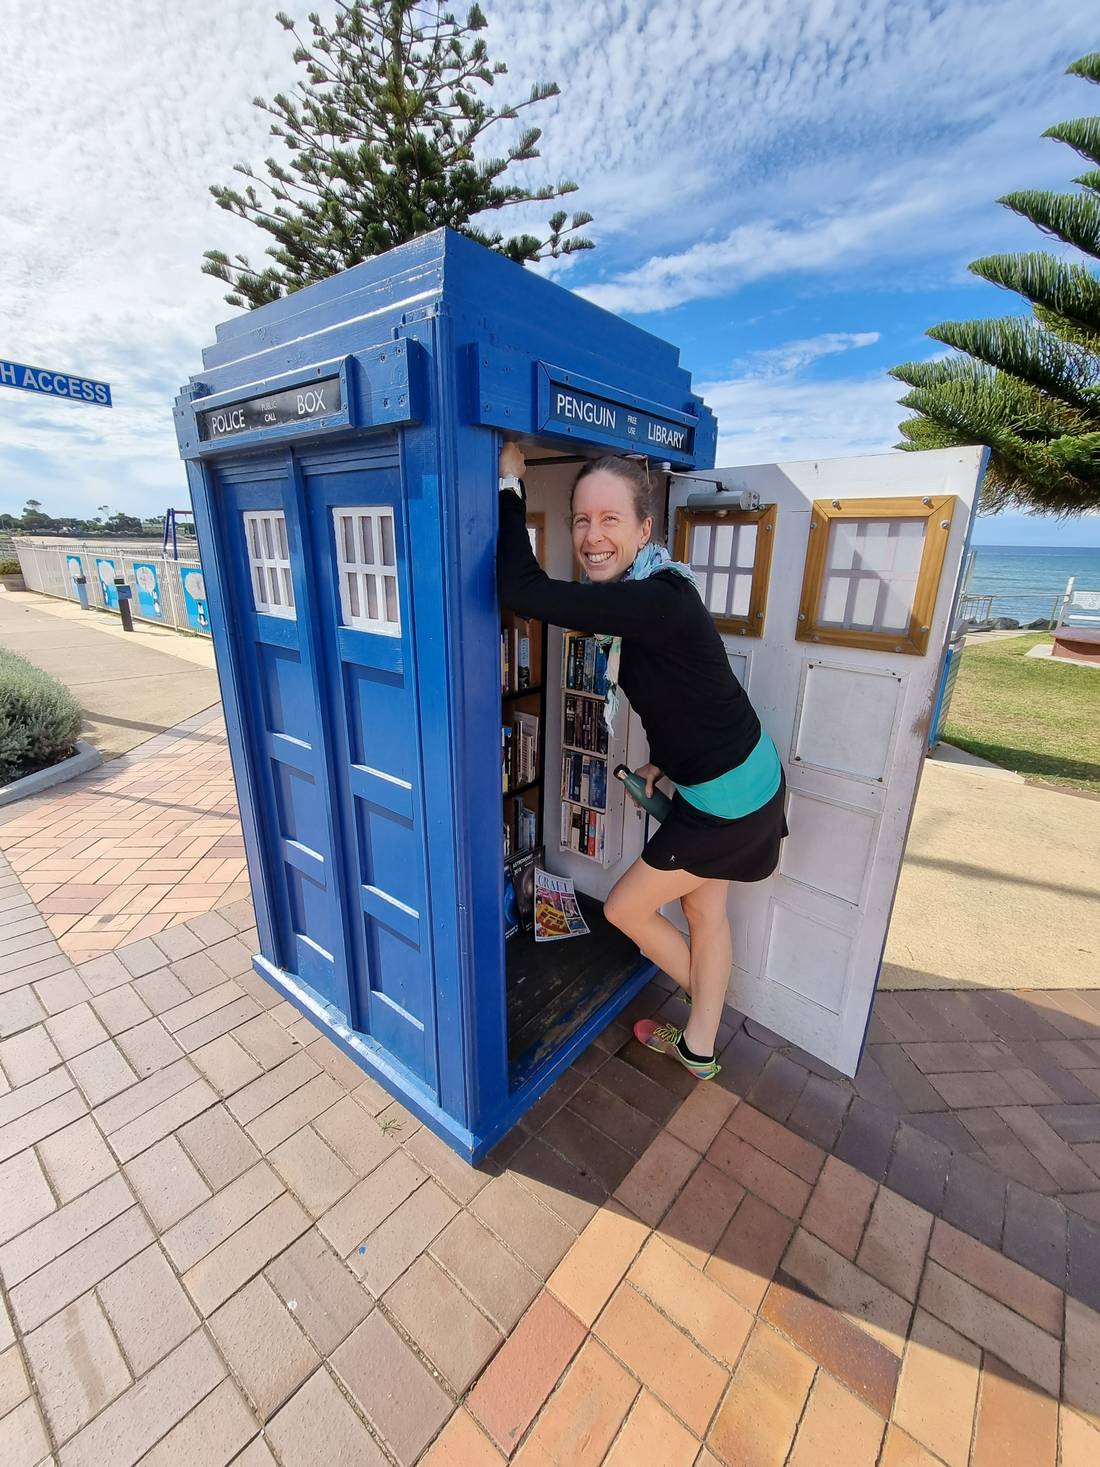 So that’s what’s inside Doctors Who’s Tartis Police Box: a free exchange book library!